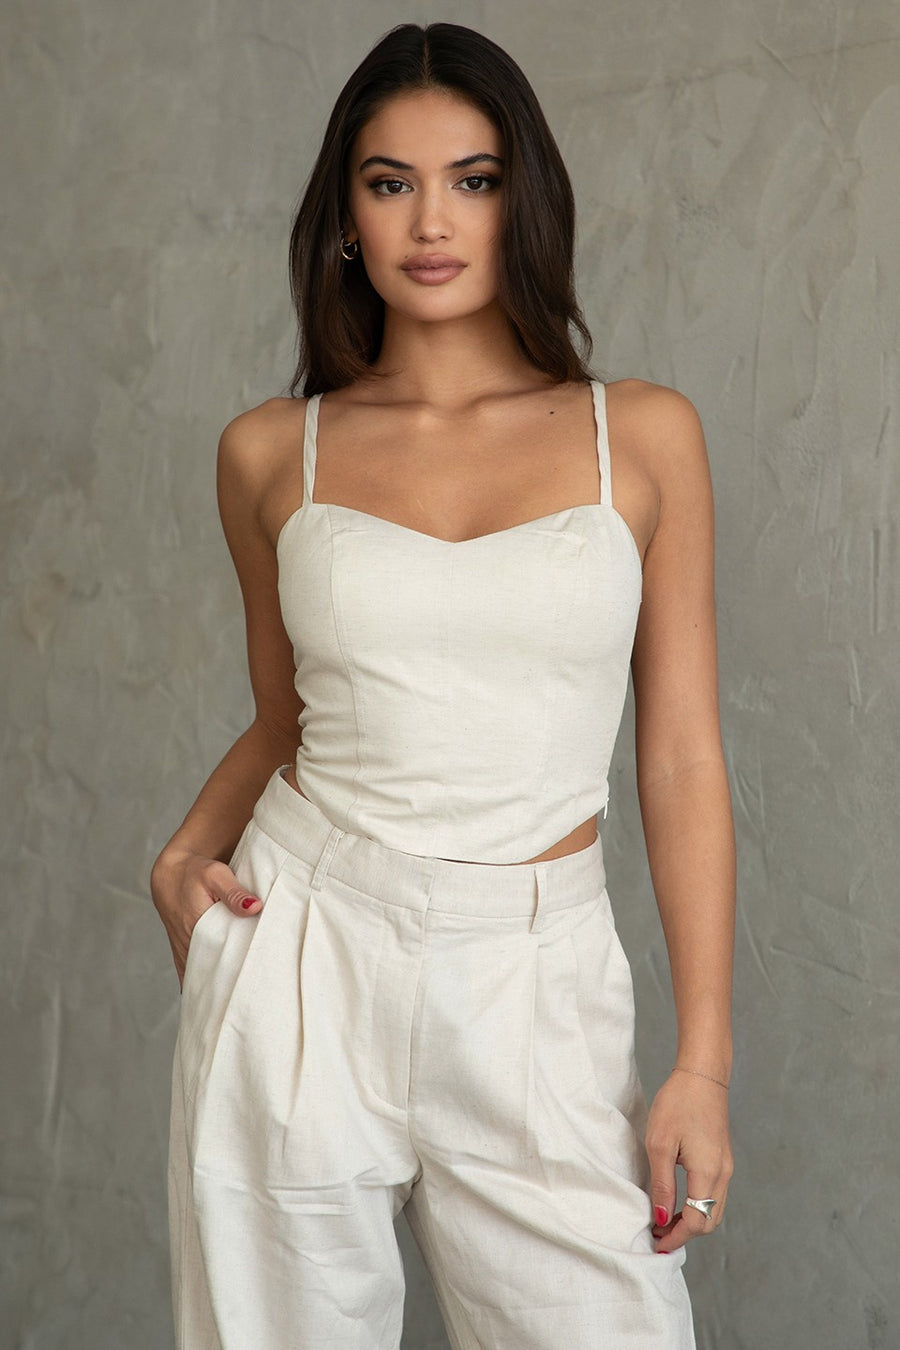 Featuring a cropped linen tank with a side zipper in the color natural